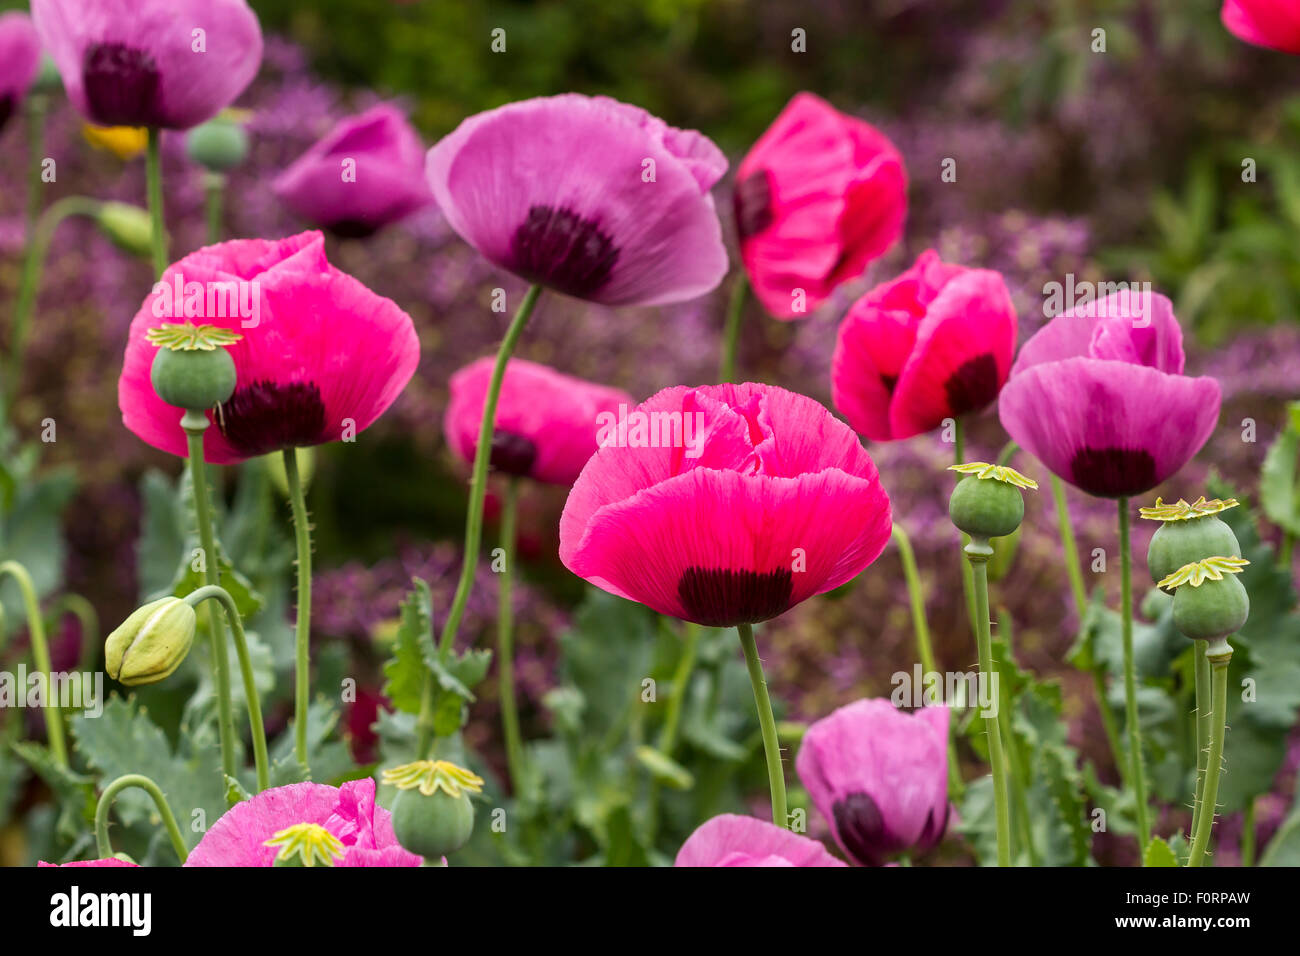 Poppies growing in an English Garden ,a flowering plant in the subfamily Papaveroideae of the family Papaveraceae, England ,UK Stock Photo